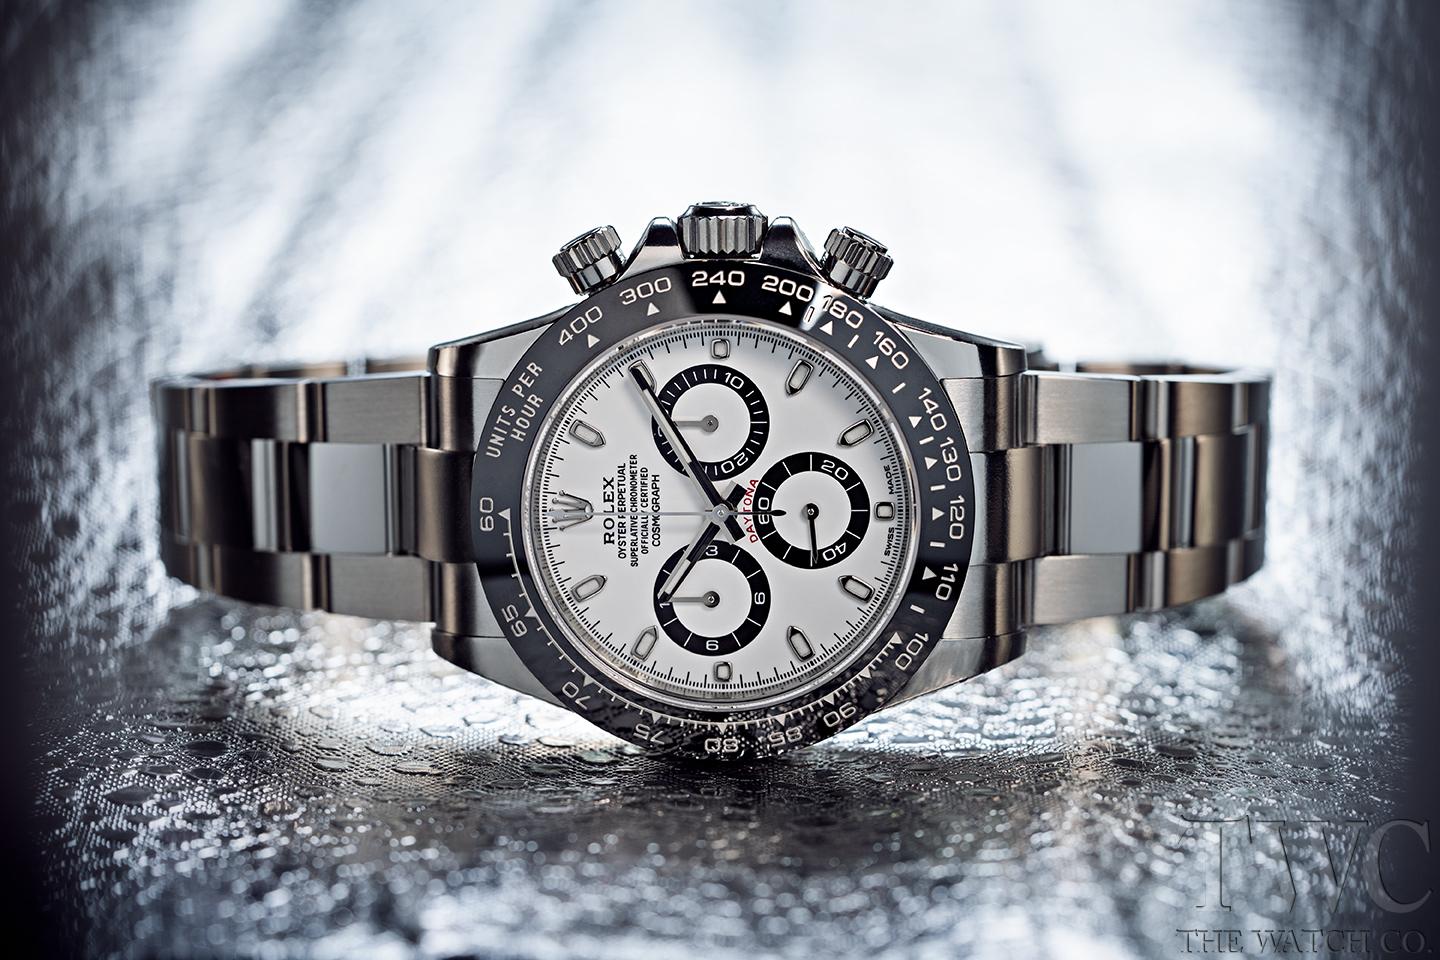 5 Reasons Why You Should Buy A Chronograph Watch - The Watch Company